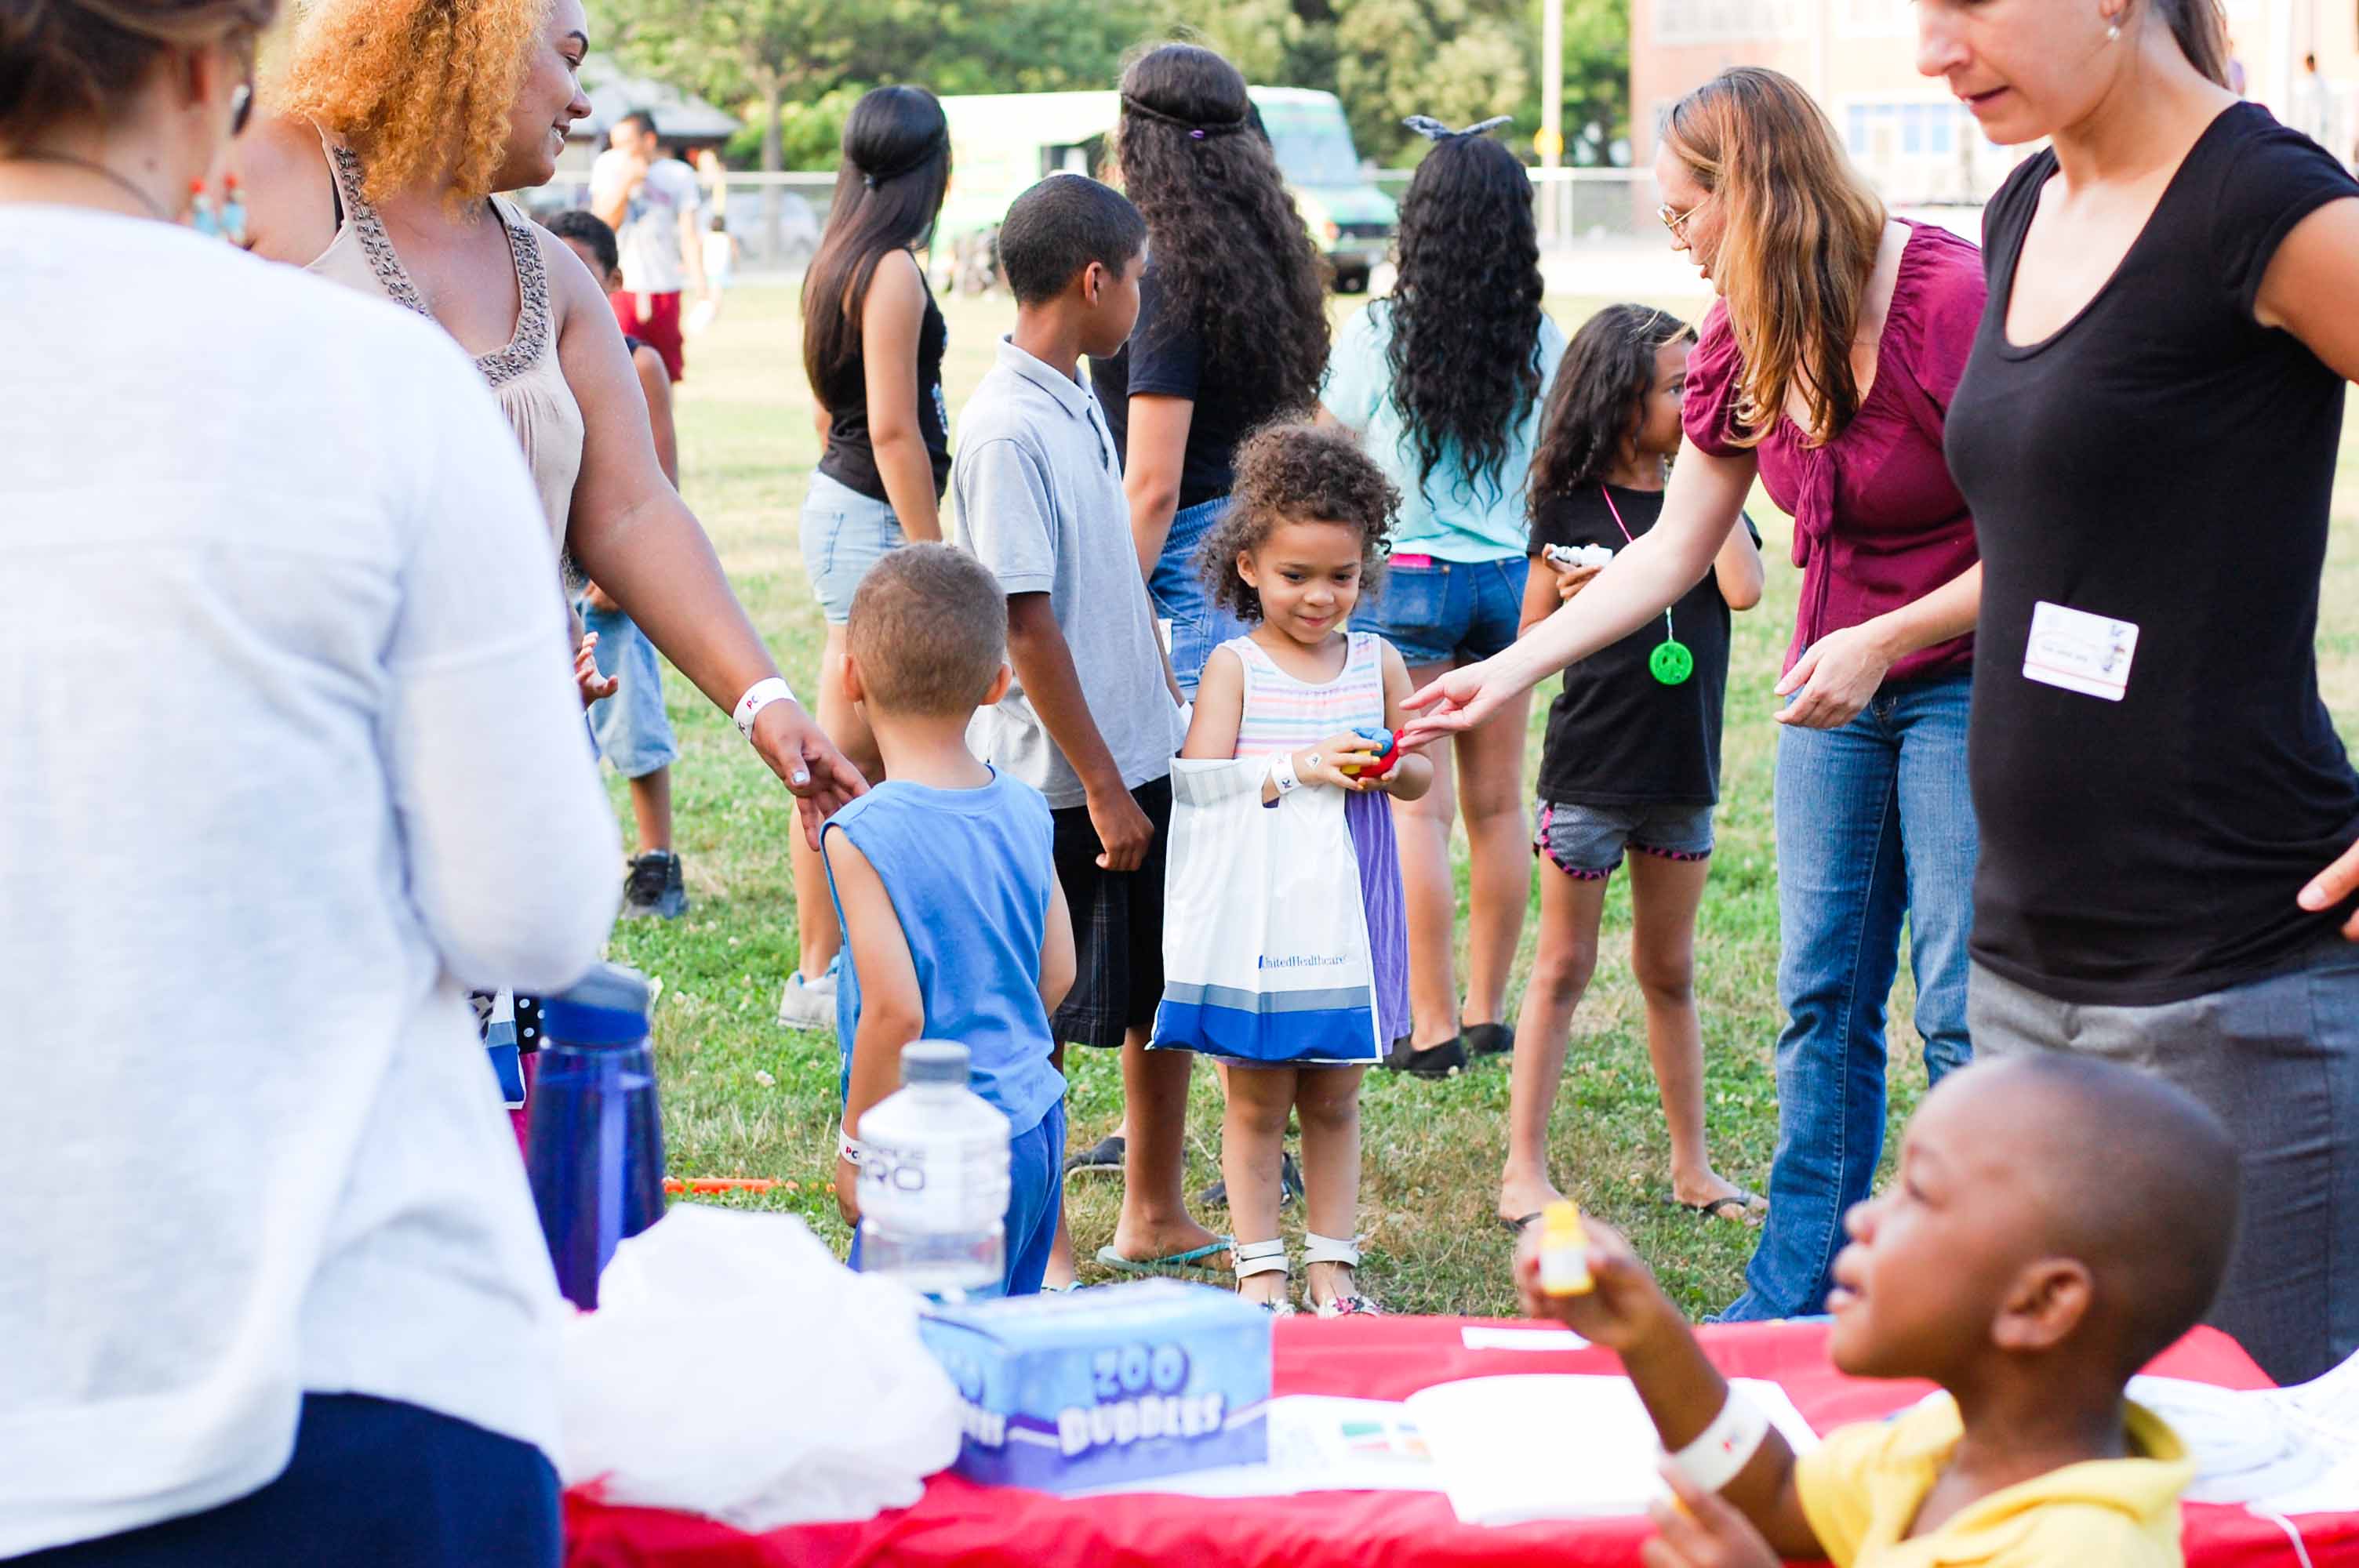 Neighborhood Block Parties on the South Side are fun for all ages